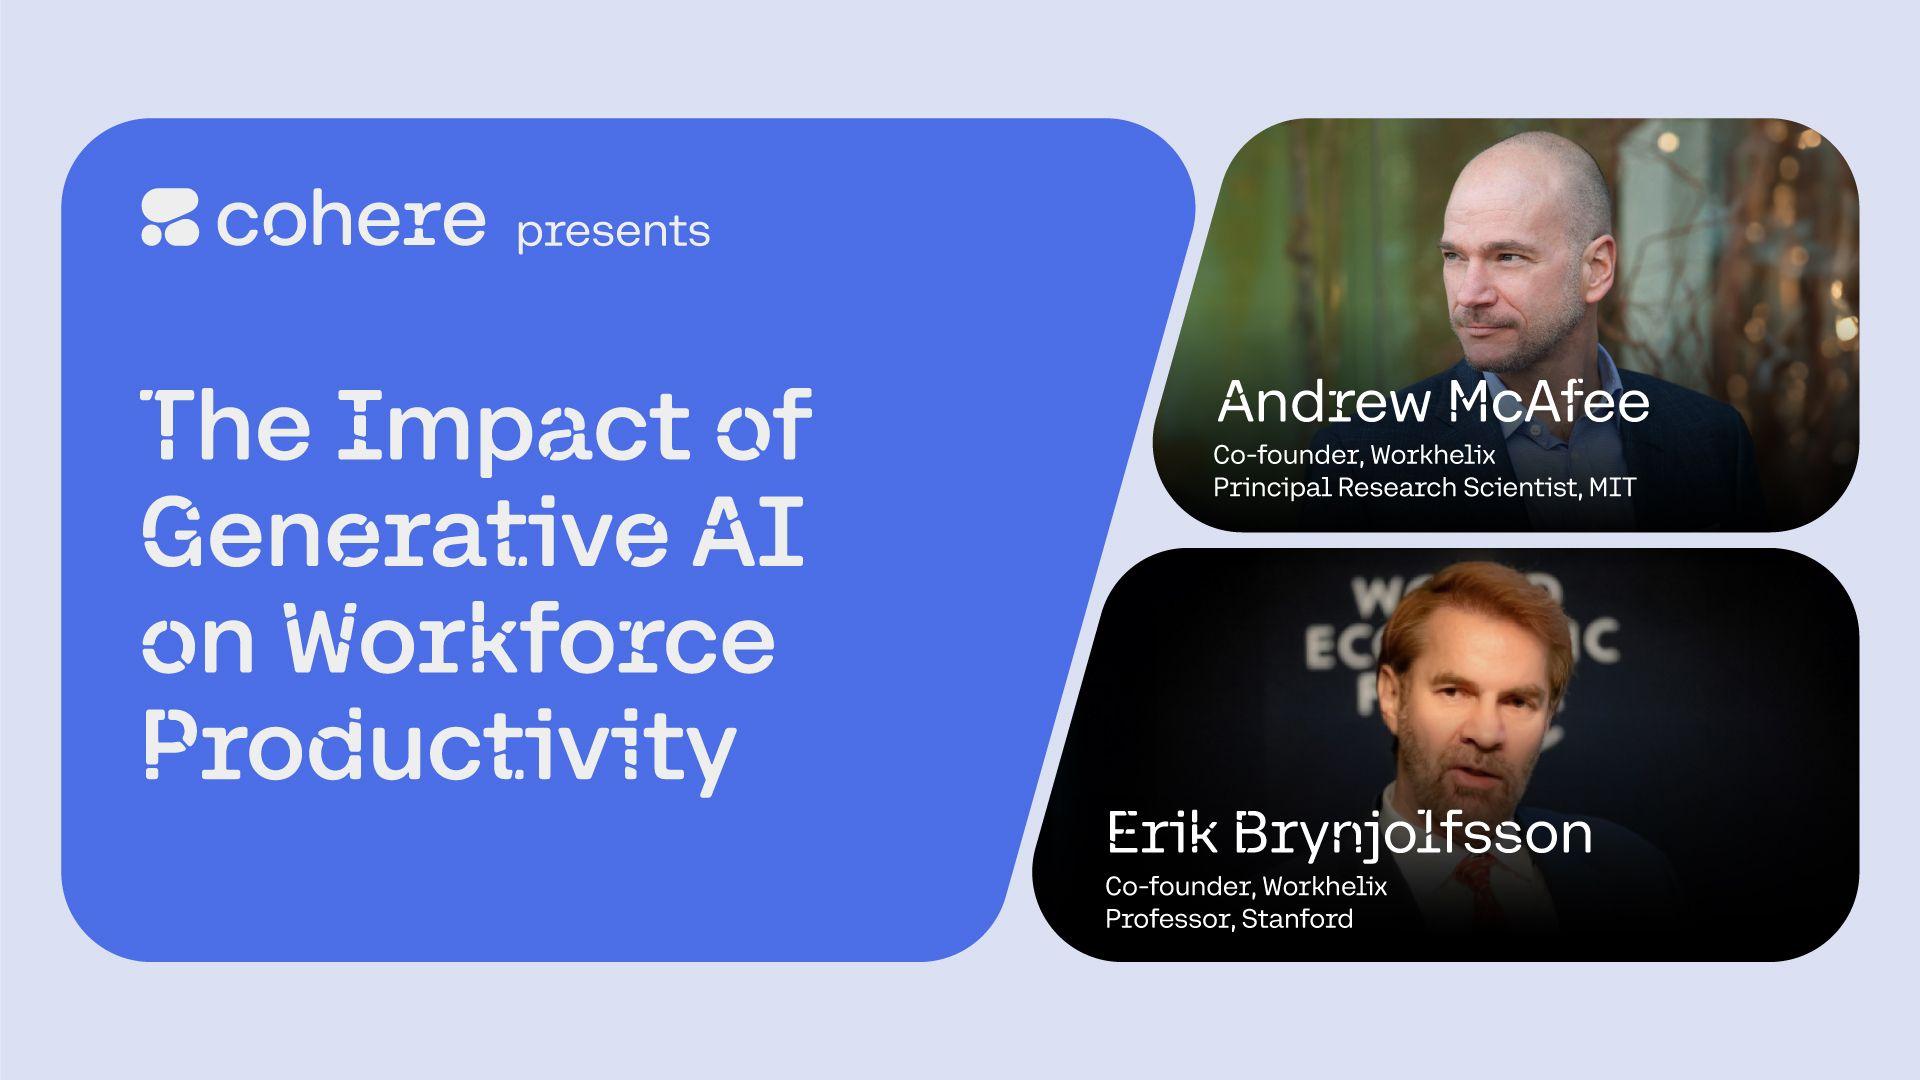 The Impact of Generative AI on Workforce Productivity